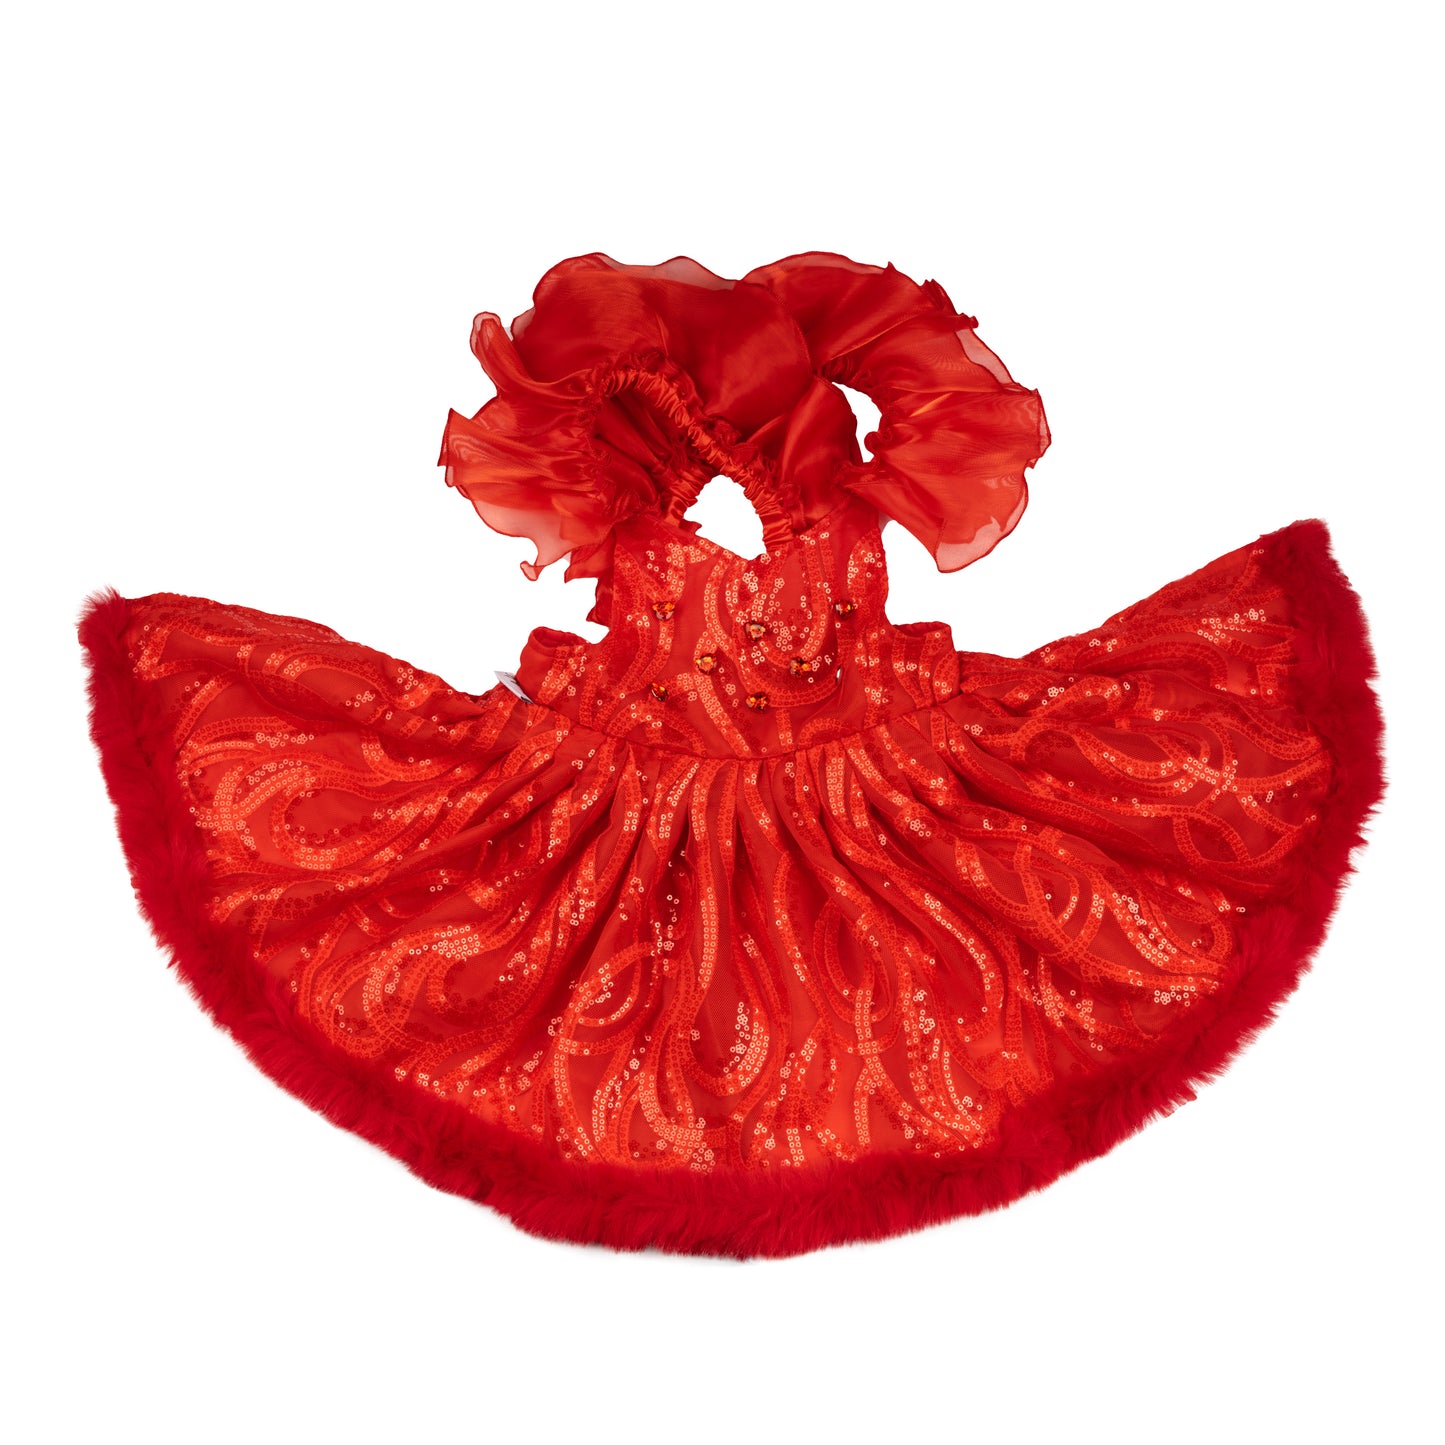 Evening Star Pet Gown - Red